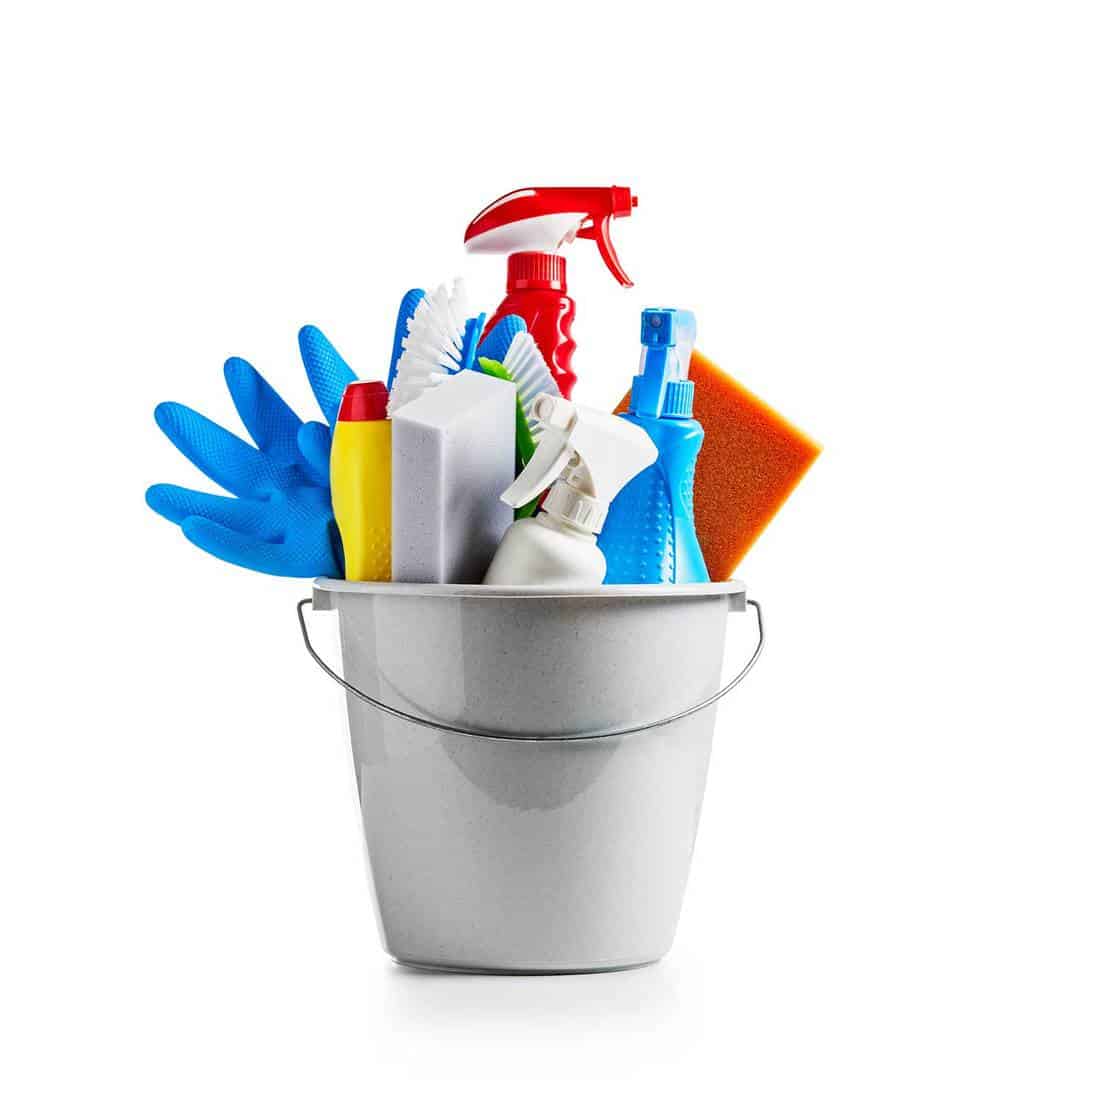 Bucket with cleaning supplies isolated on white background